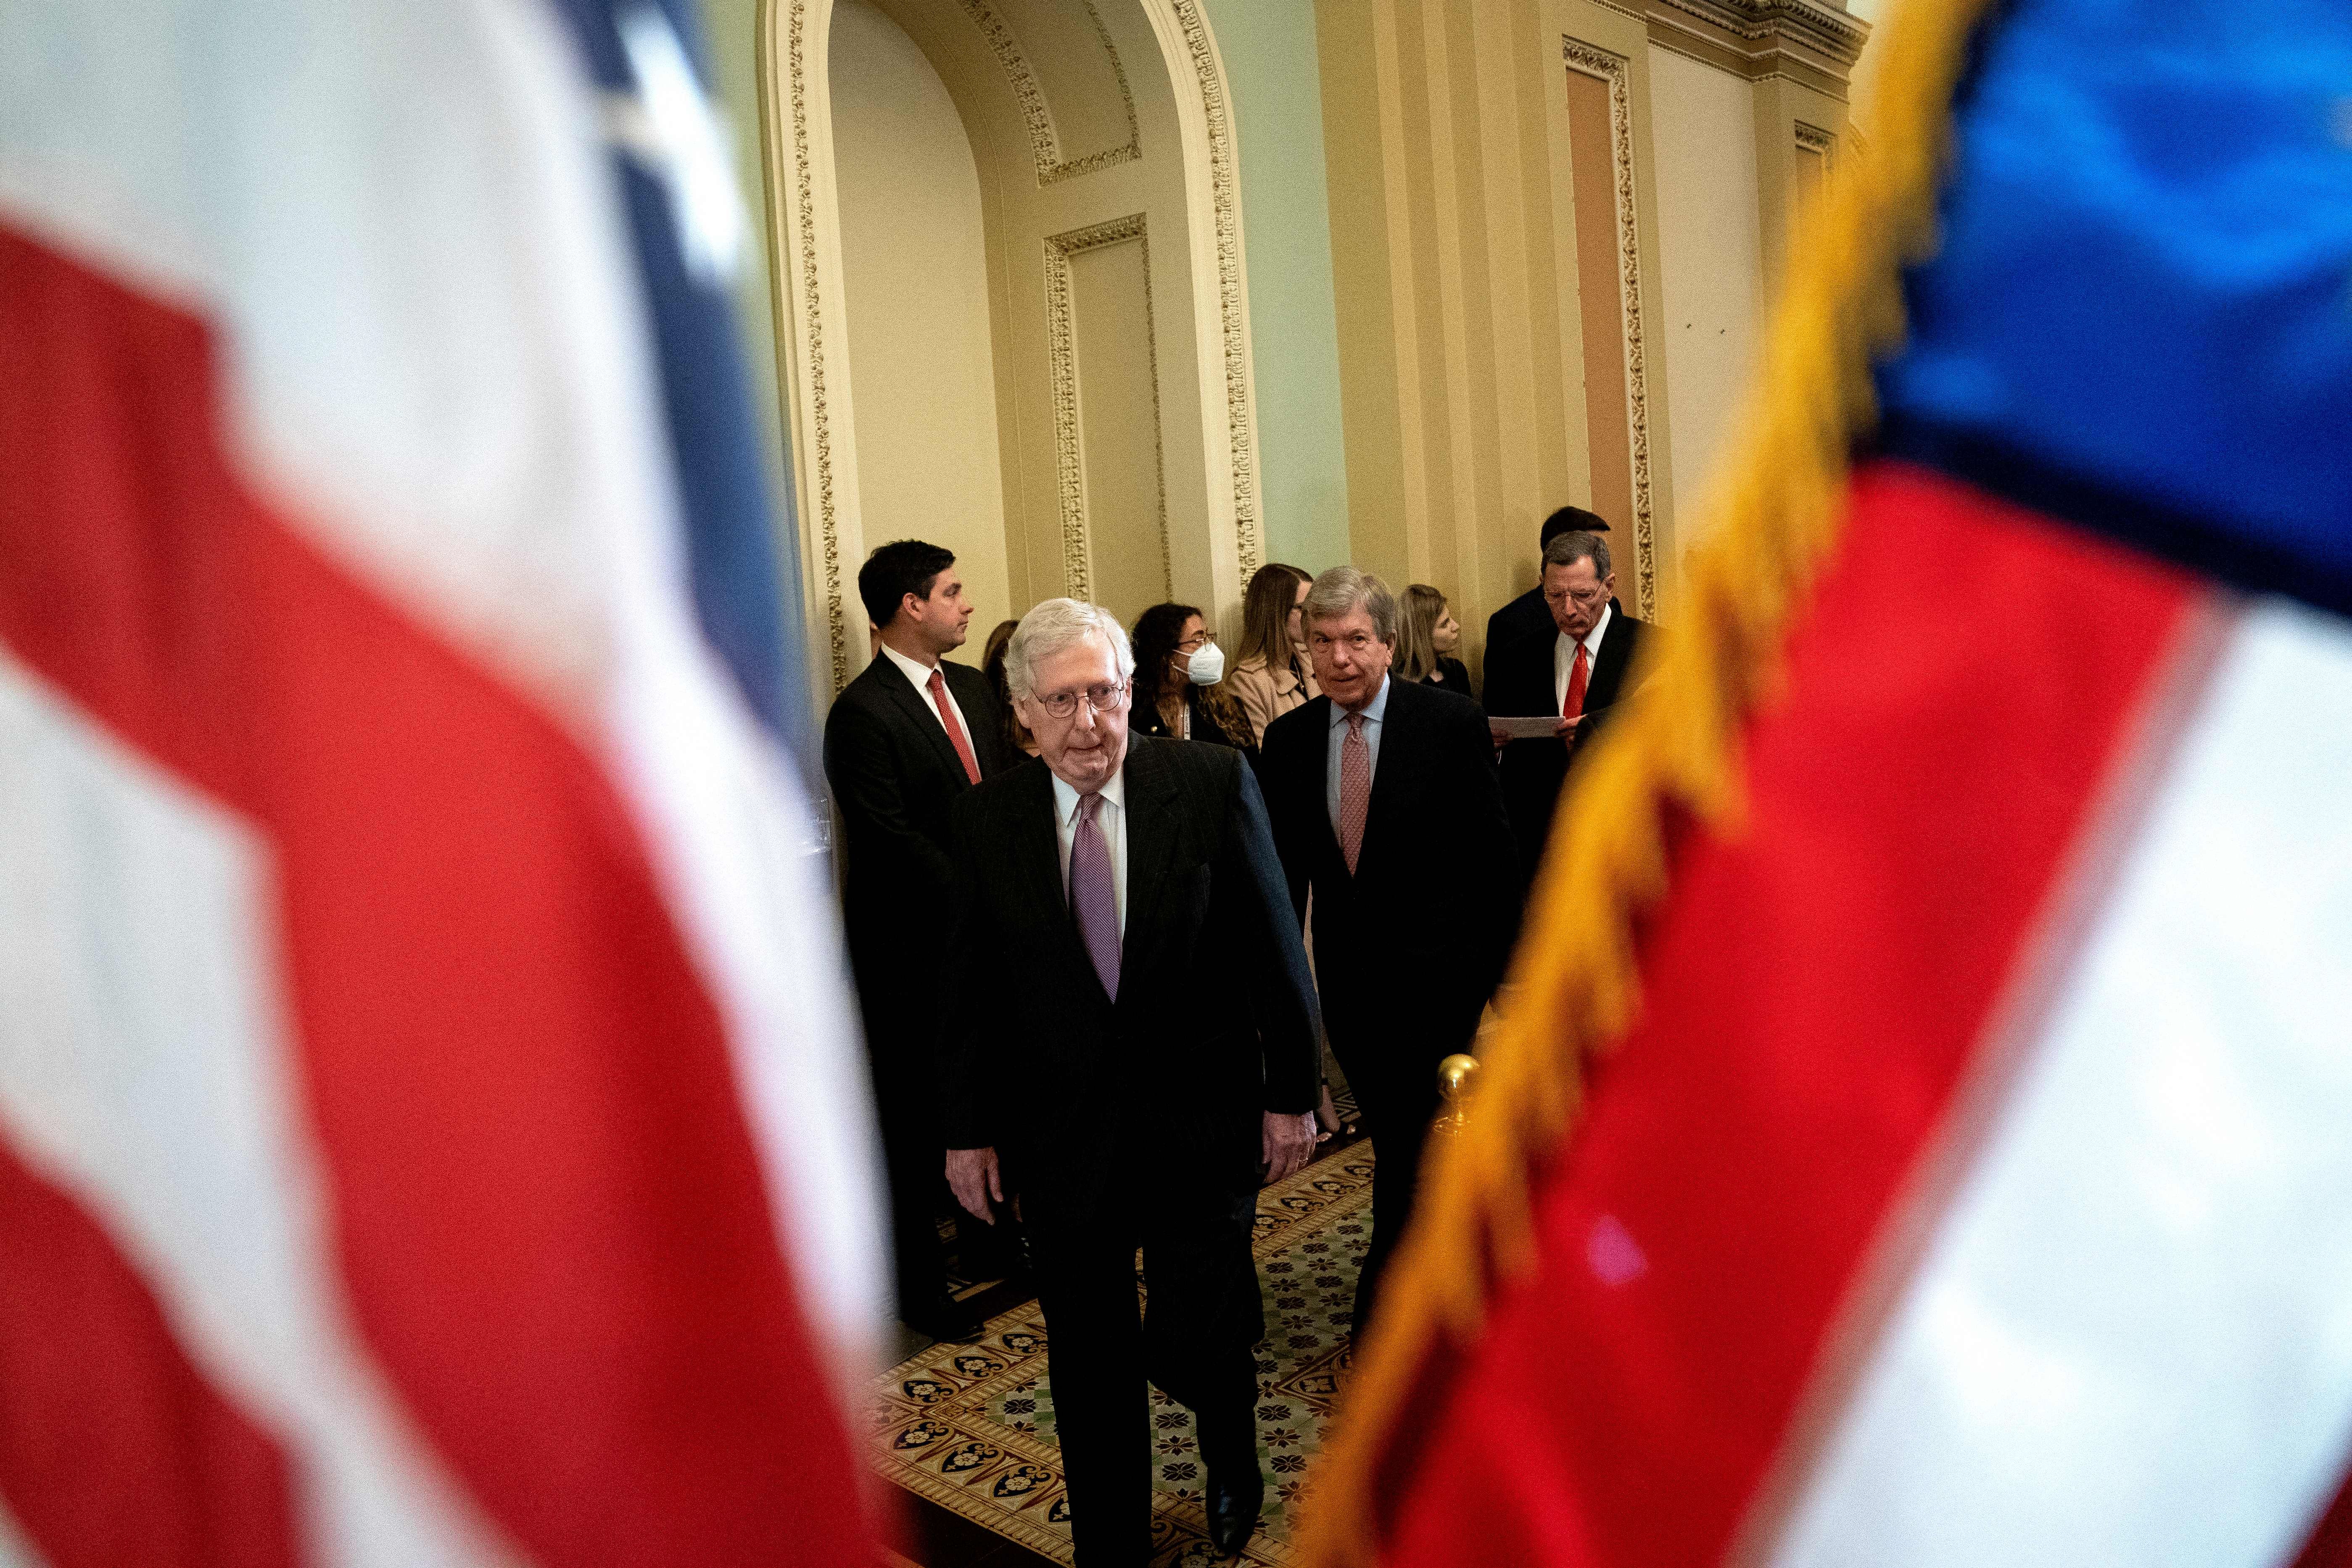 Senate Minority Leader Mitch McConnell is seen approaching a news conference on Tuesday.